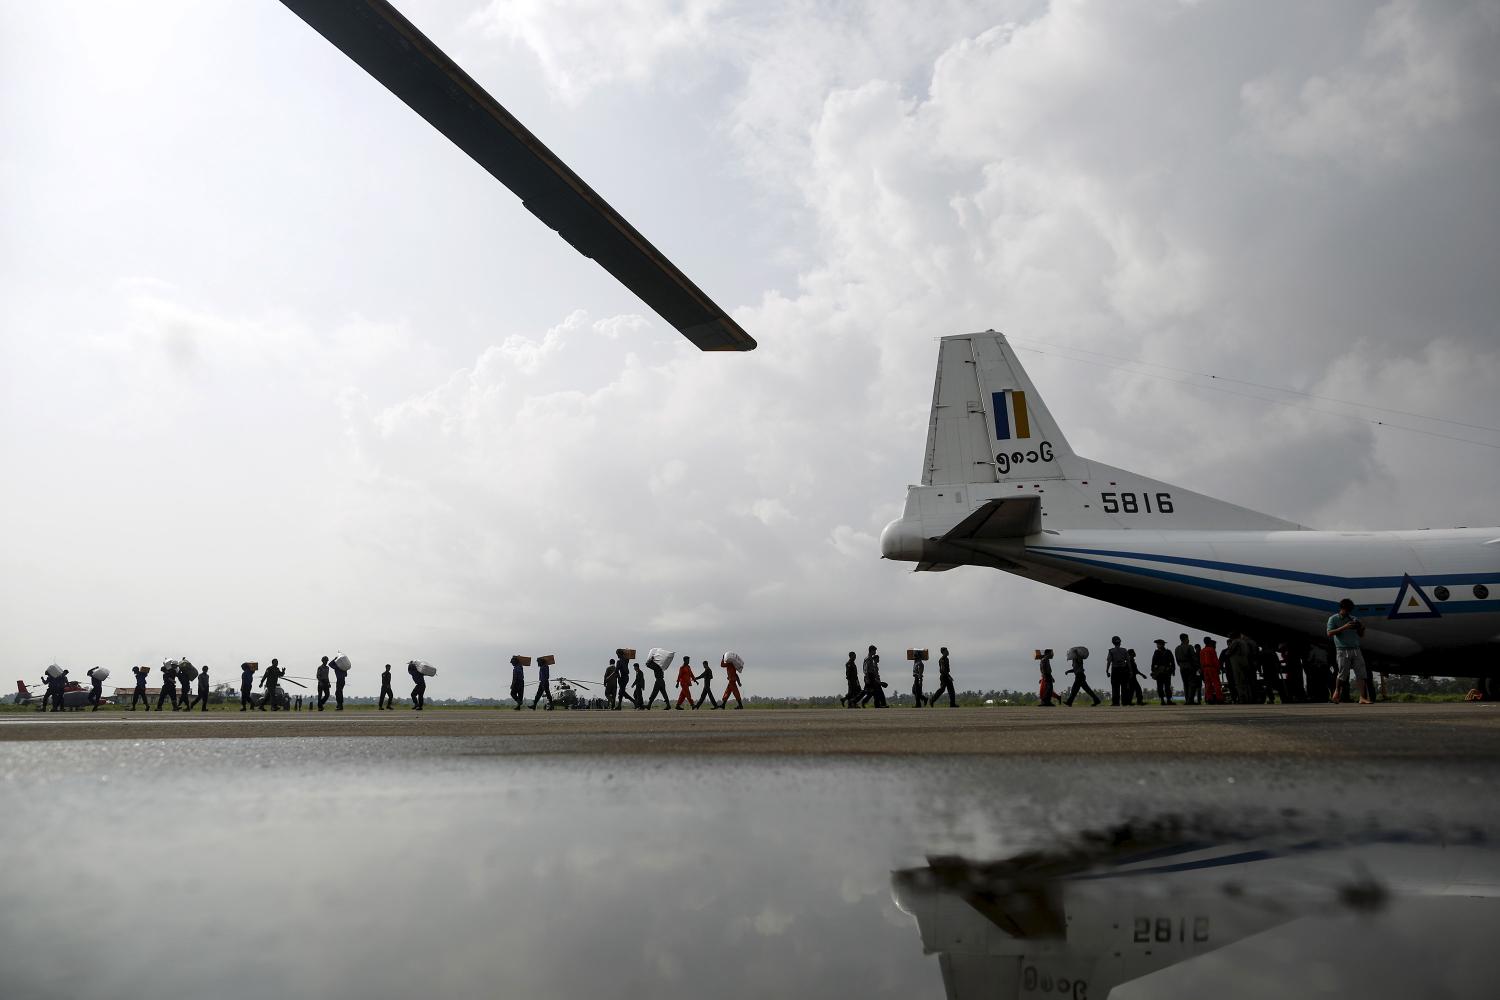 Soldiers and rescue workers unload aid from cargo aeroplane in Sittwe airpot at Sittwe, Rakhine state, August 5, 2015. The United States will announce an aid package for Myanmar to help the Southeast Asian country provide relief for the hundreds of thousands of people affected by floods, Secretary of State John Kerry said on Wednesday. More than 250,000 people have been affected and 69 killed by flooding that was triggered last week by monsoon rains, according to the Ministry of Social Welfare, Relief and Resettlement. REUTERS/Soe Zeya Tun - GF20000014051